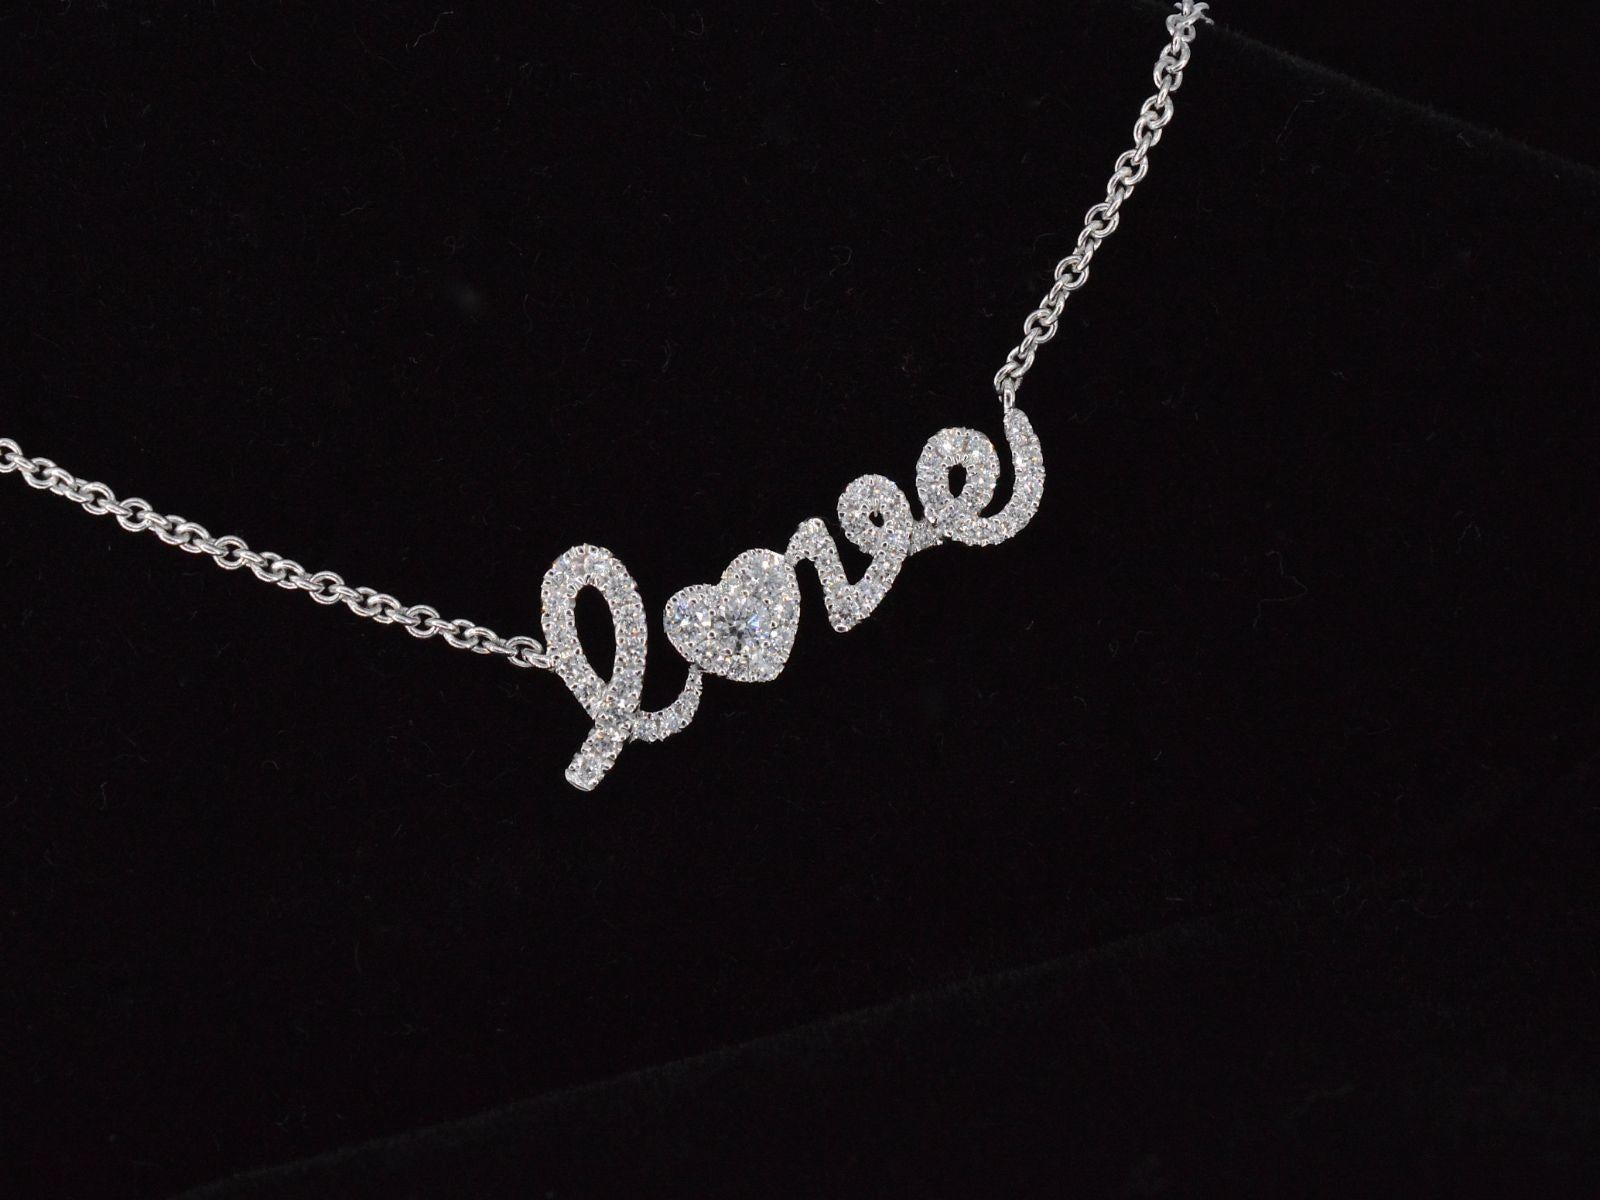 White Gold 'Love' Necklace with Diamonds 2